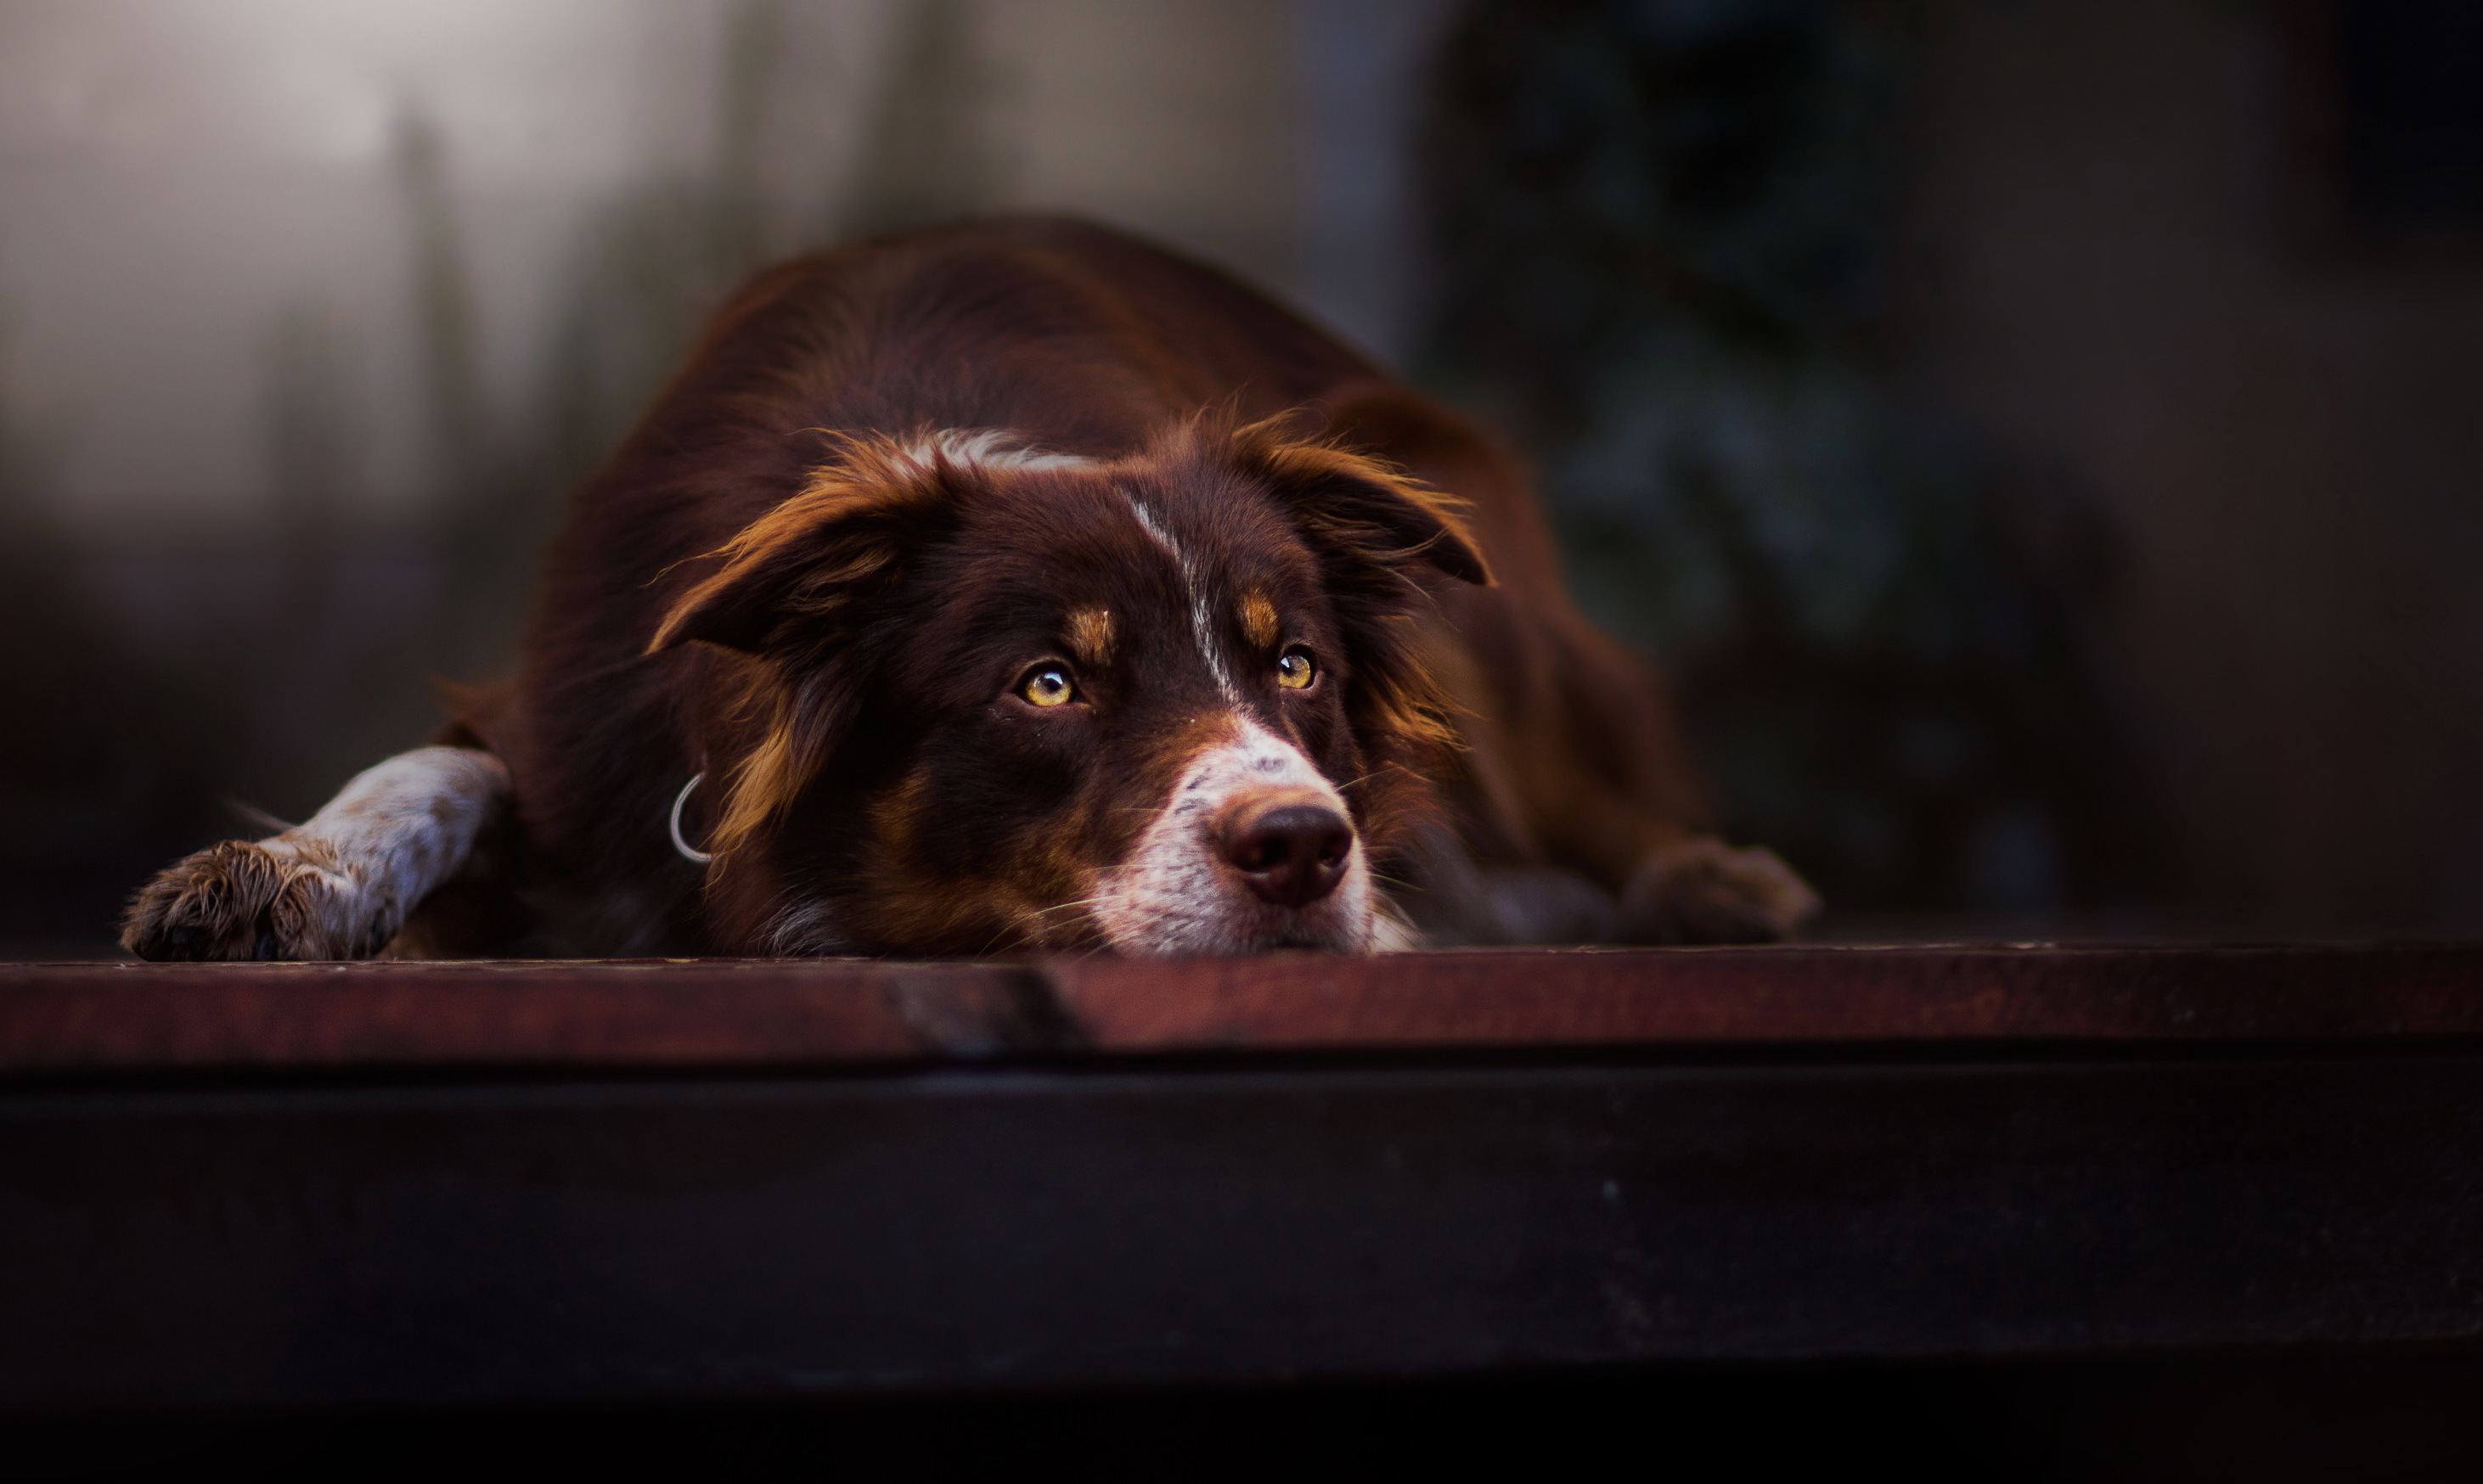 dogs, border collie, brown, animal, dog, cute, resting